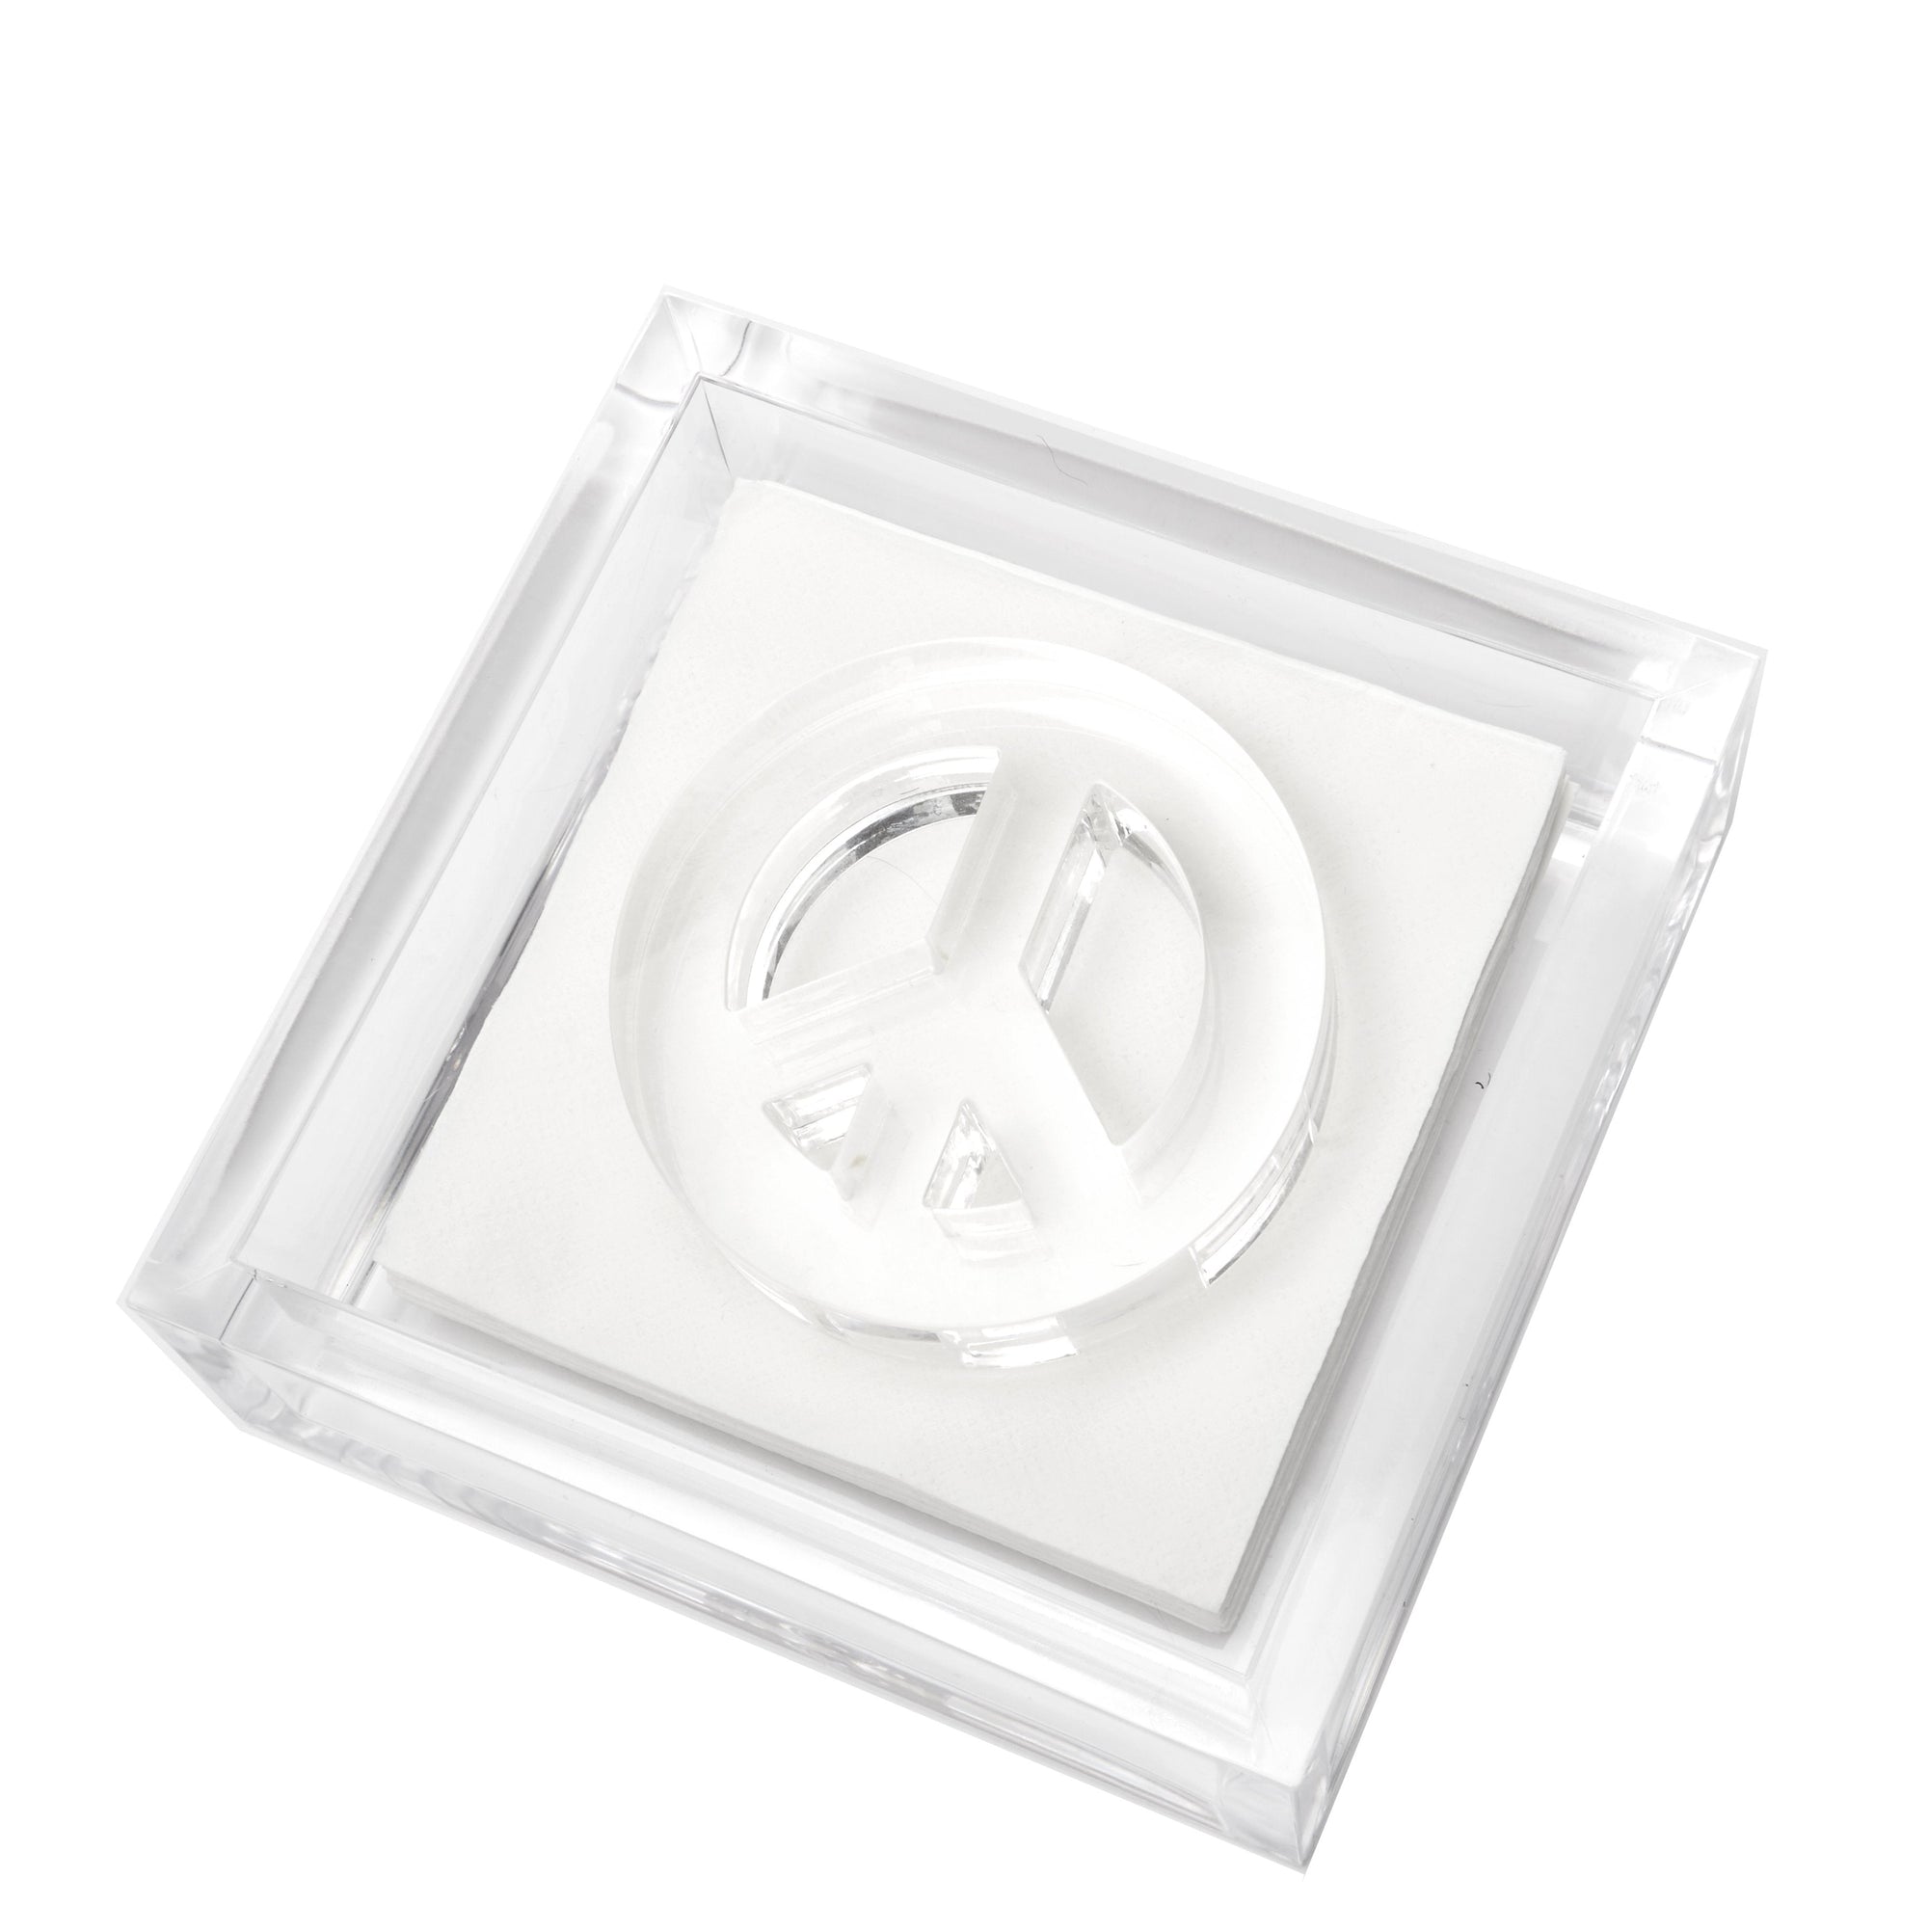 Cocktail Napkin Holder PEACE SIGN 4 inches by 4 inches 